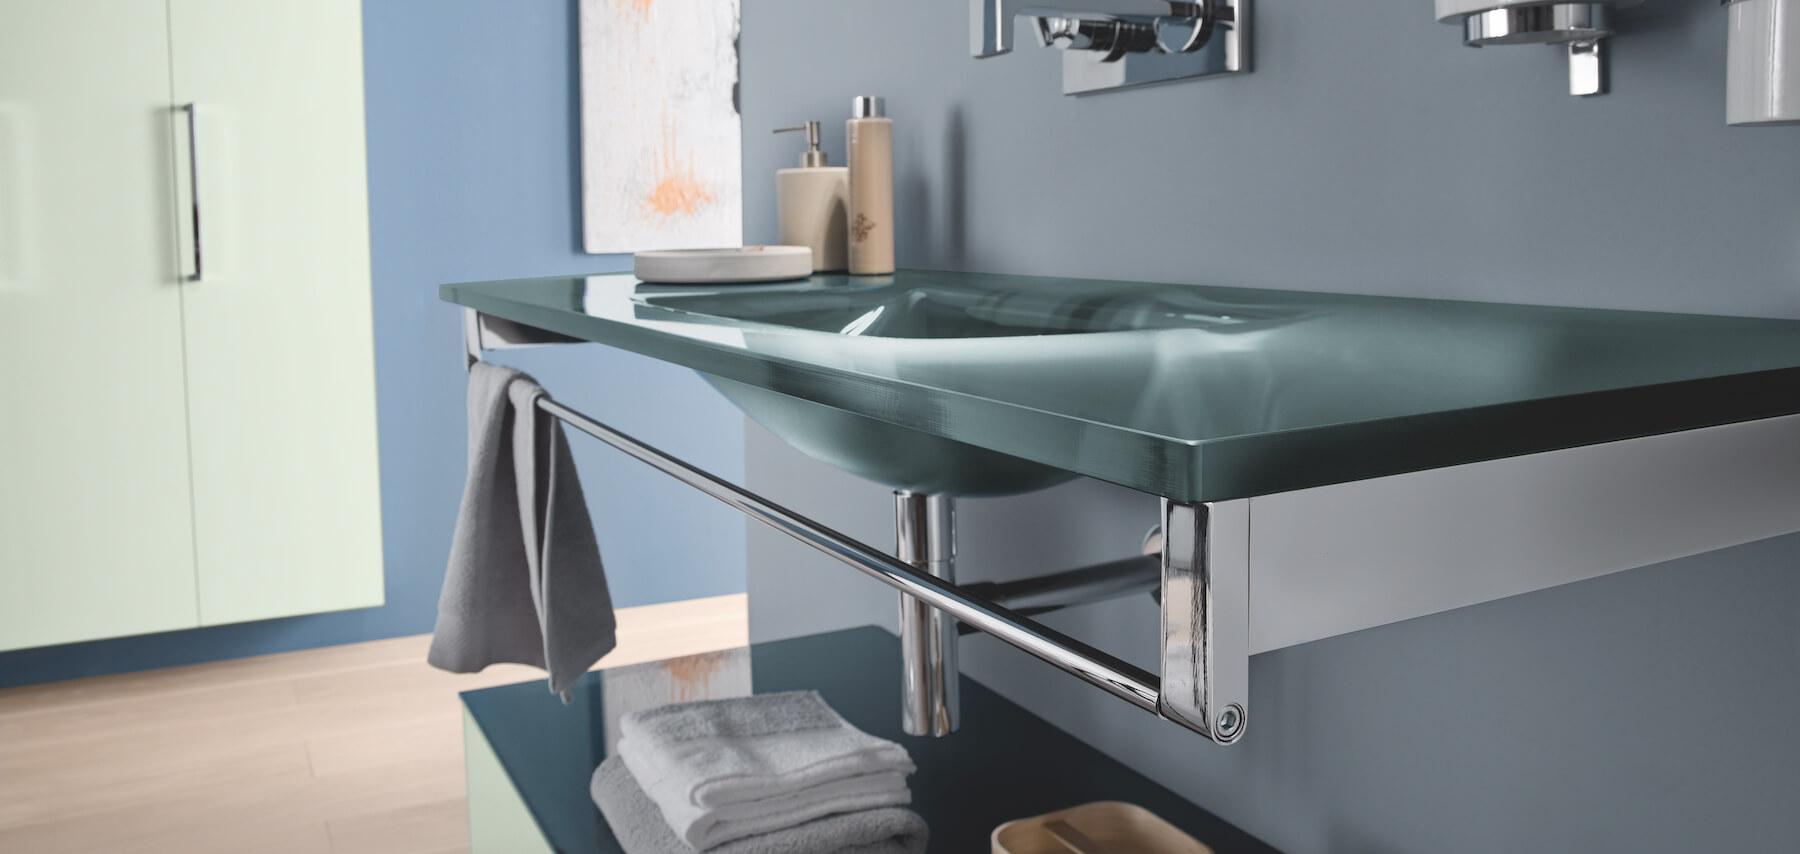 A glass bathroom countertop in blue with an integrated basin and towel bar